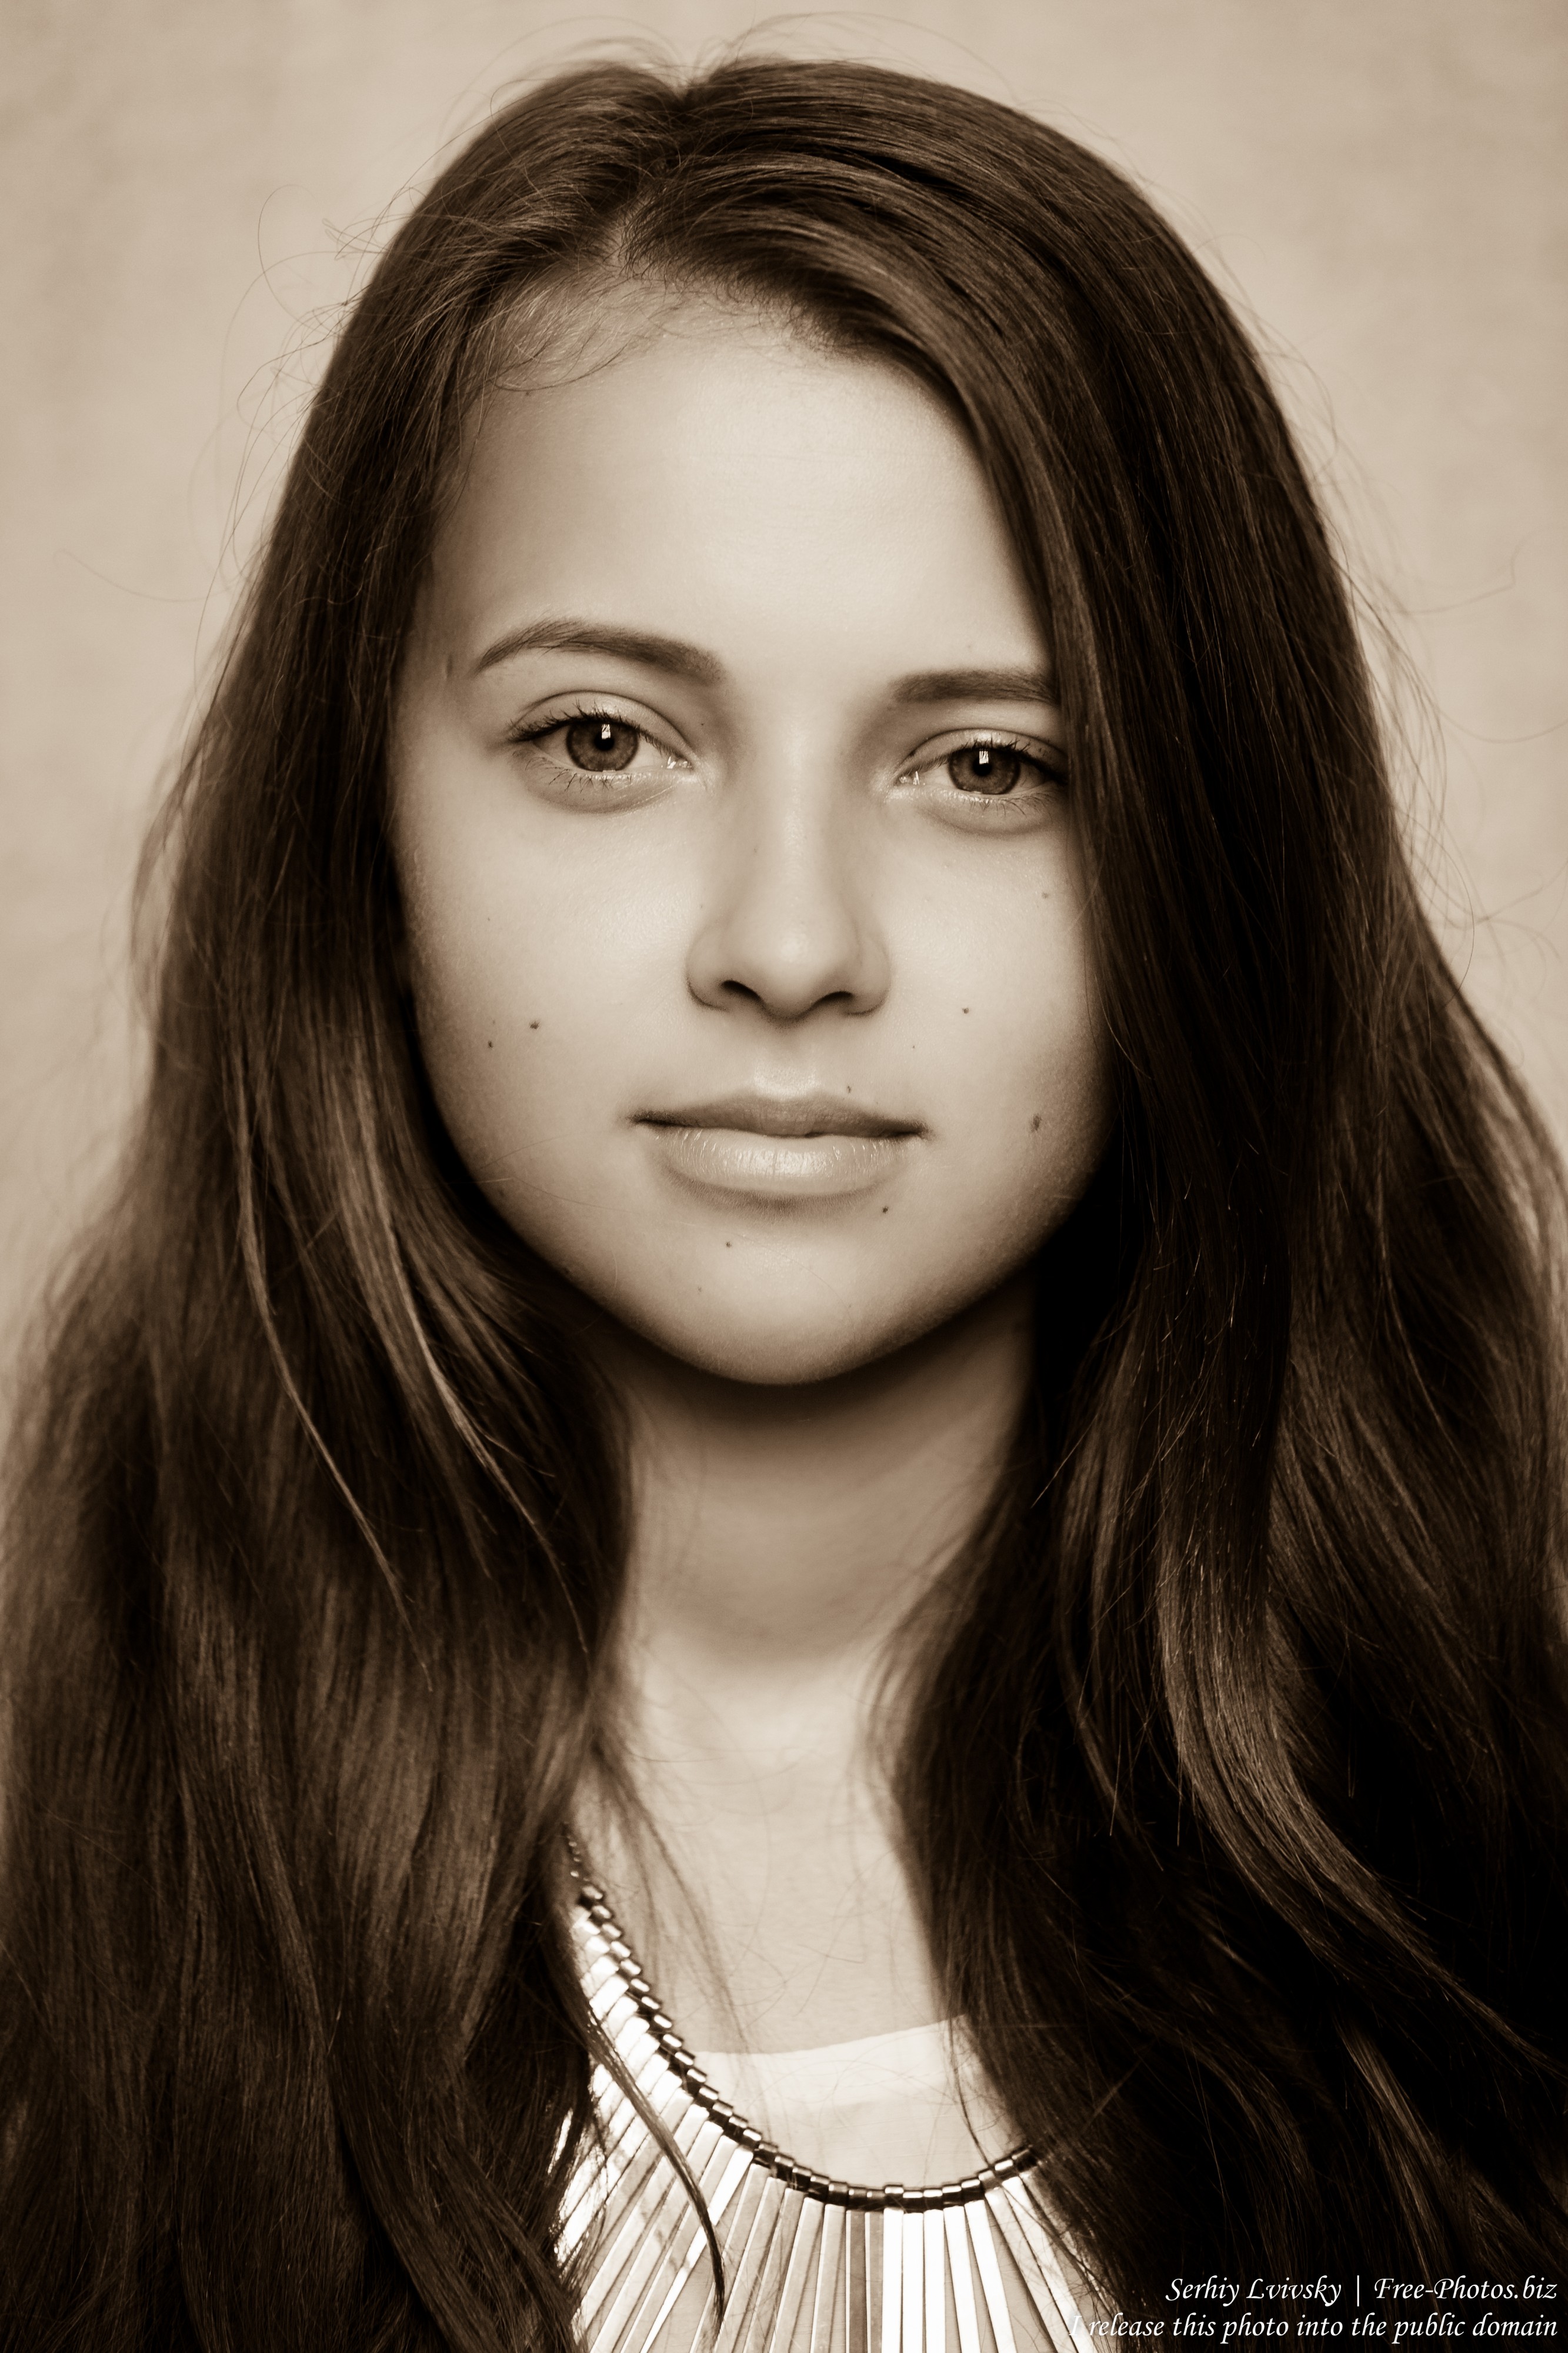 Photo of a cute 15-year old girl photographed in July 2015, picture 7